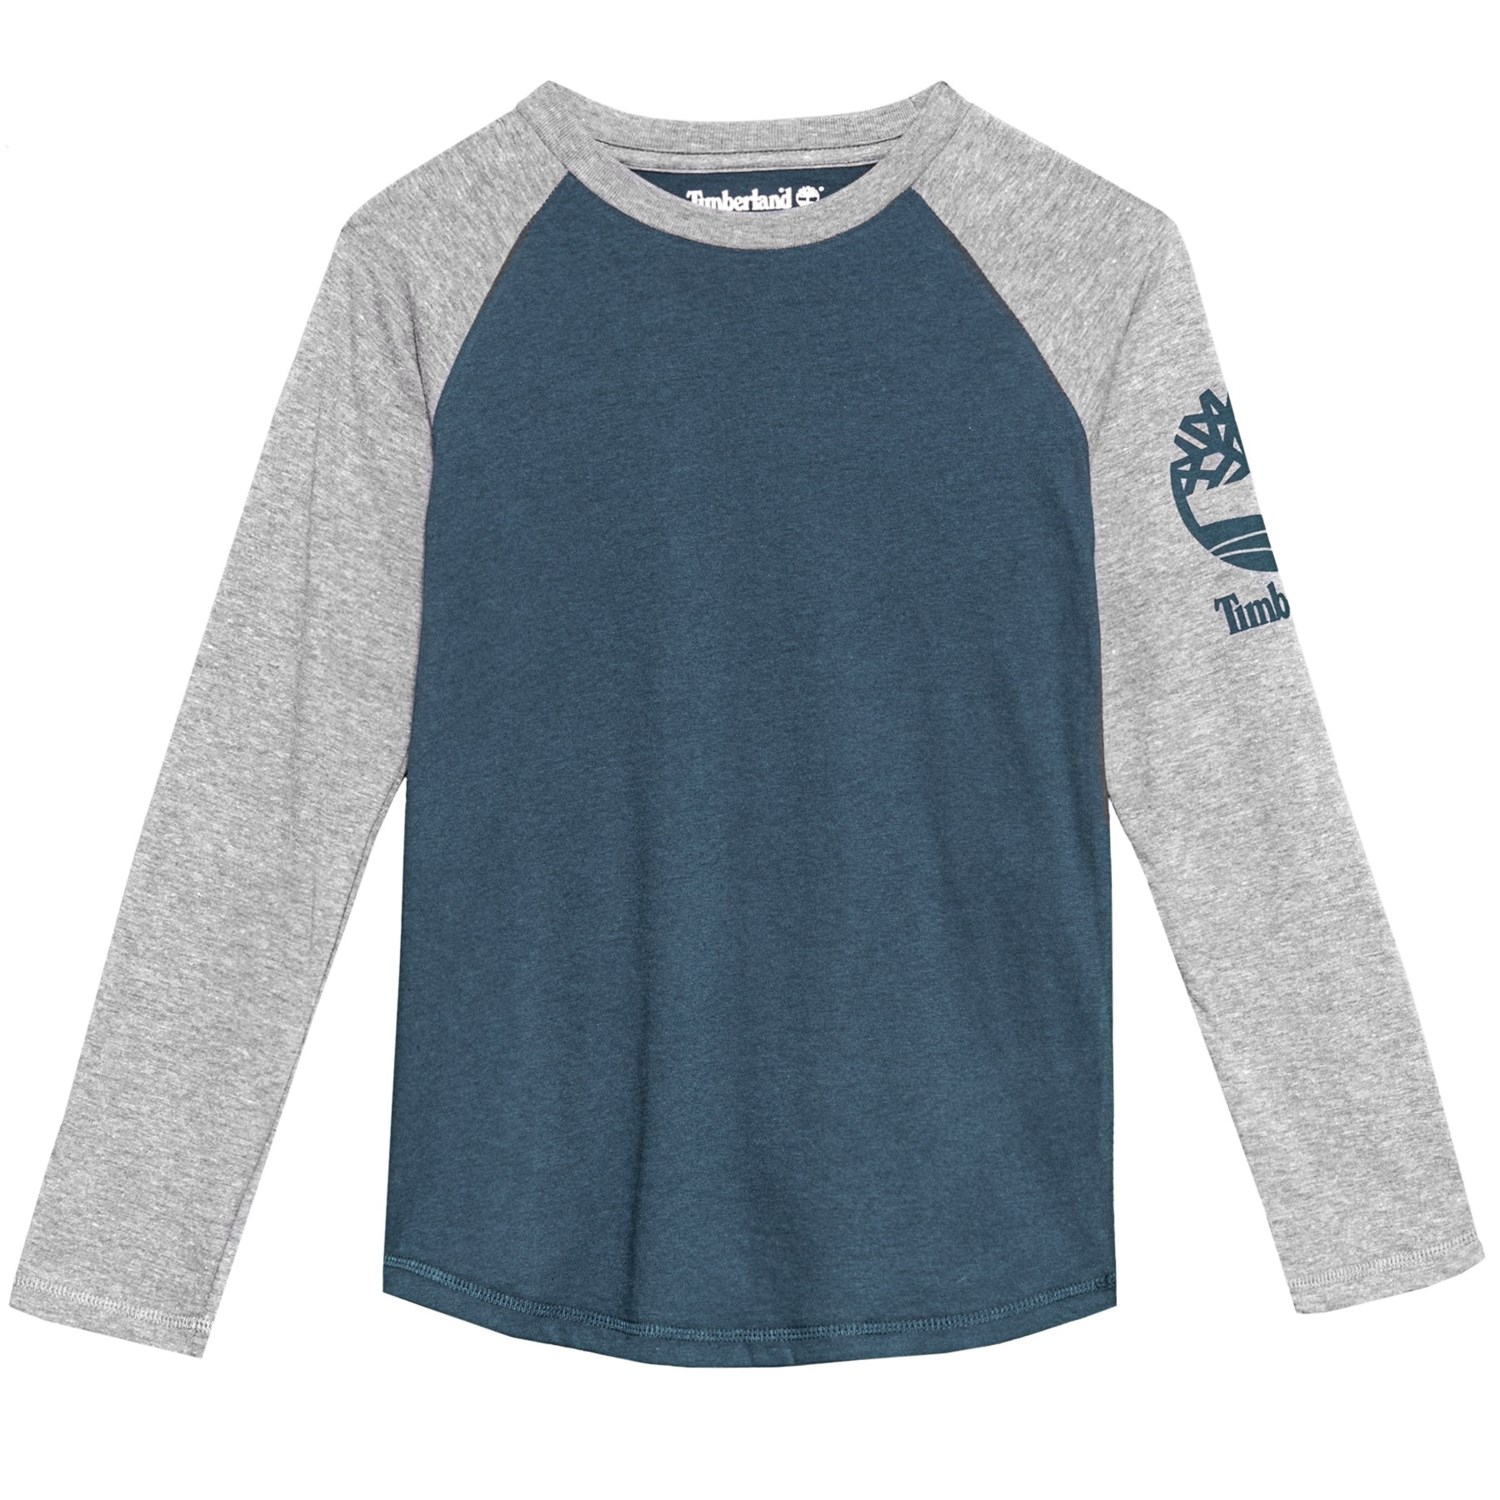 Timberland Spruce T-Shirt – Long Sleeve (For Big Boys)